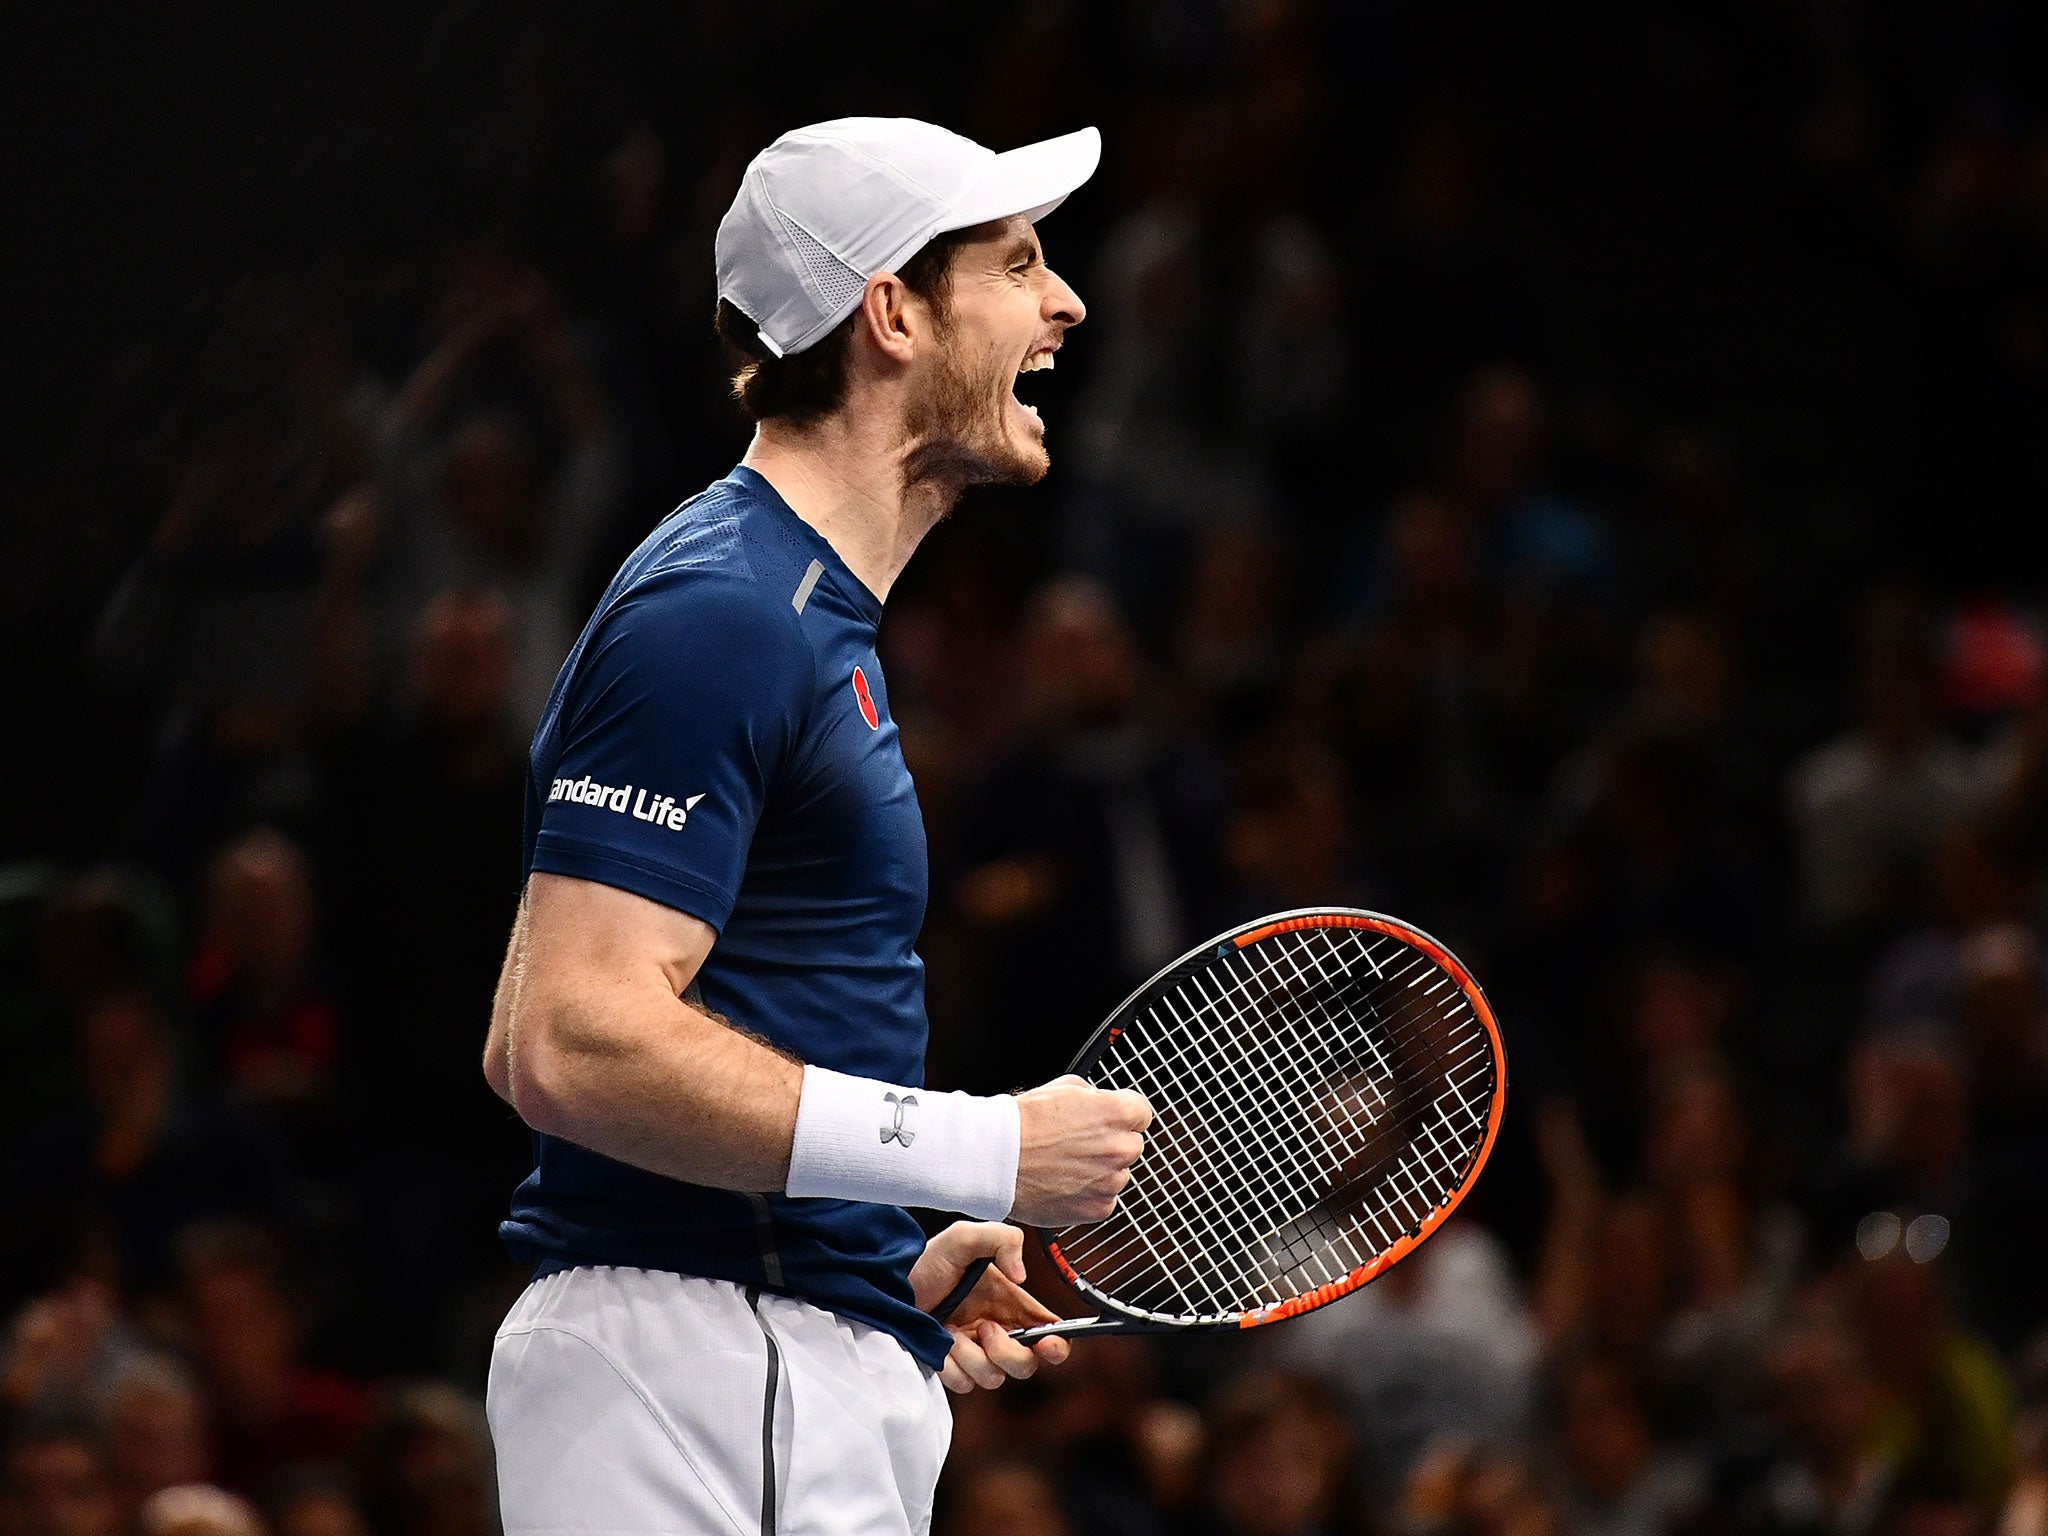 Andy Murray will now be looking to defend his new-found status as world No.1